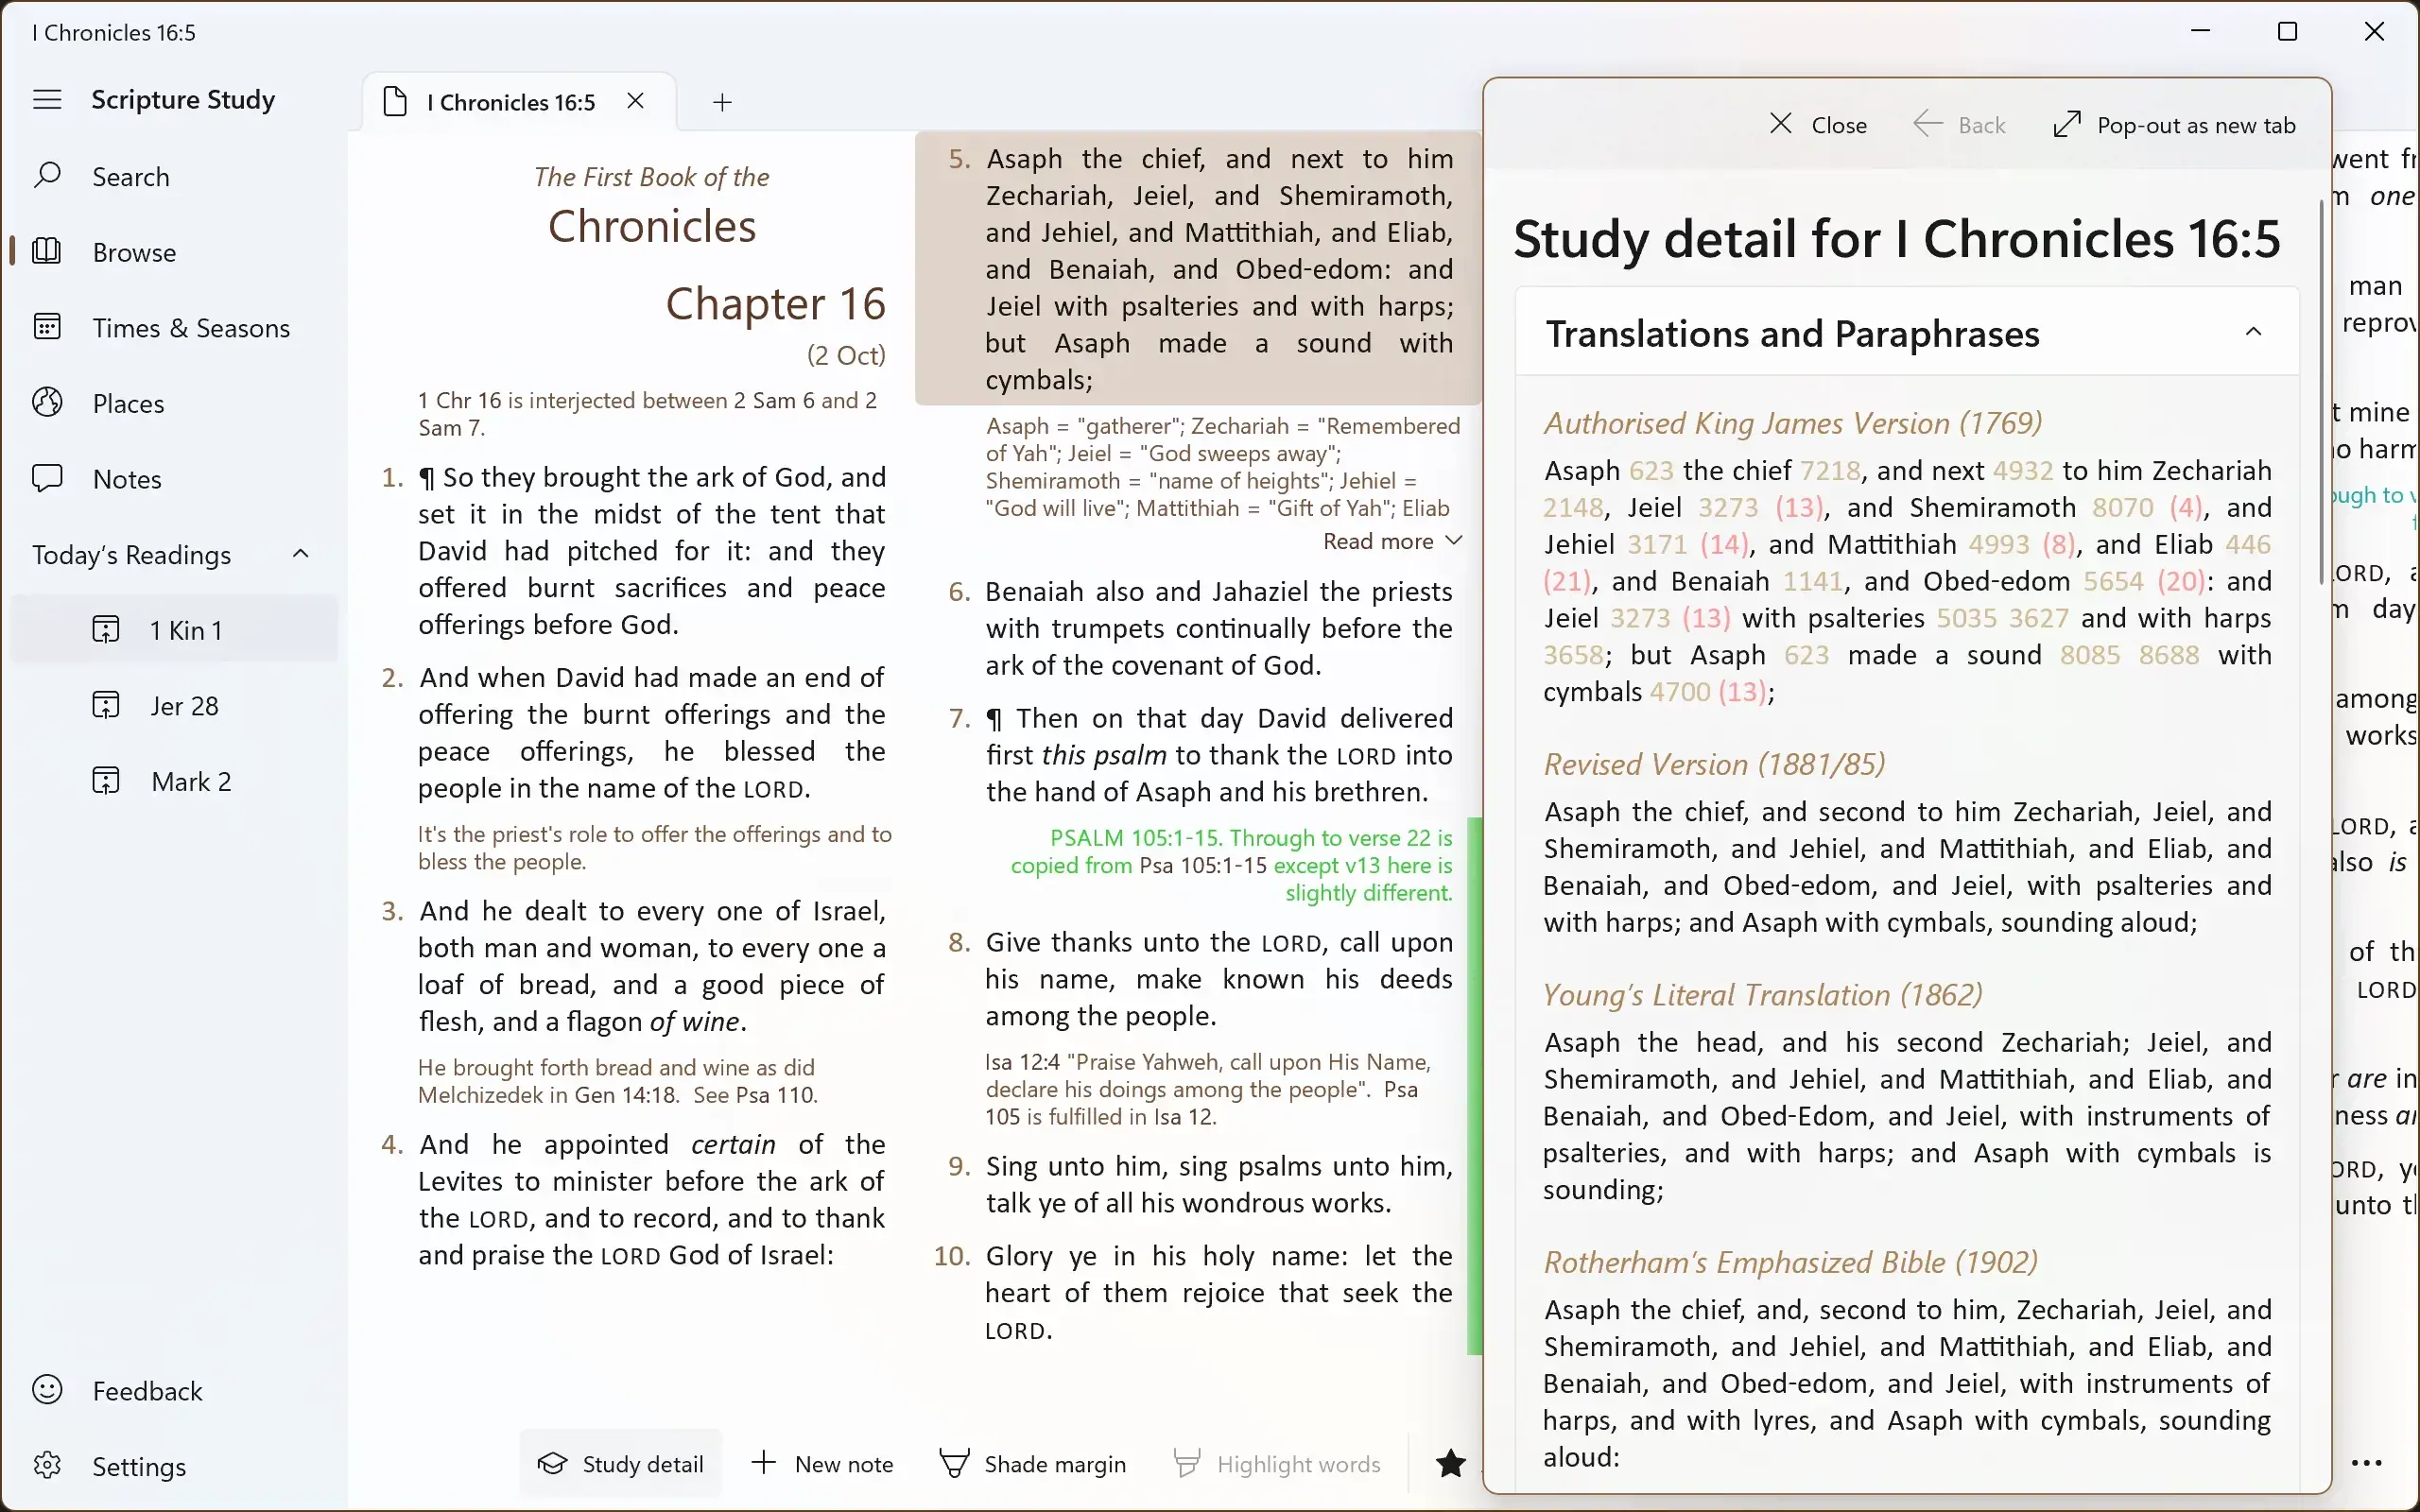 Screenshot showing just the Authorised Version text, but with a pop-up showing additional study detail for a given verse, including Strong's Numbers and additional translations